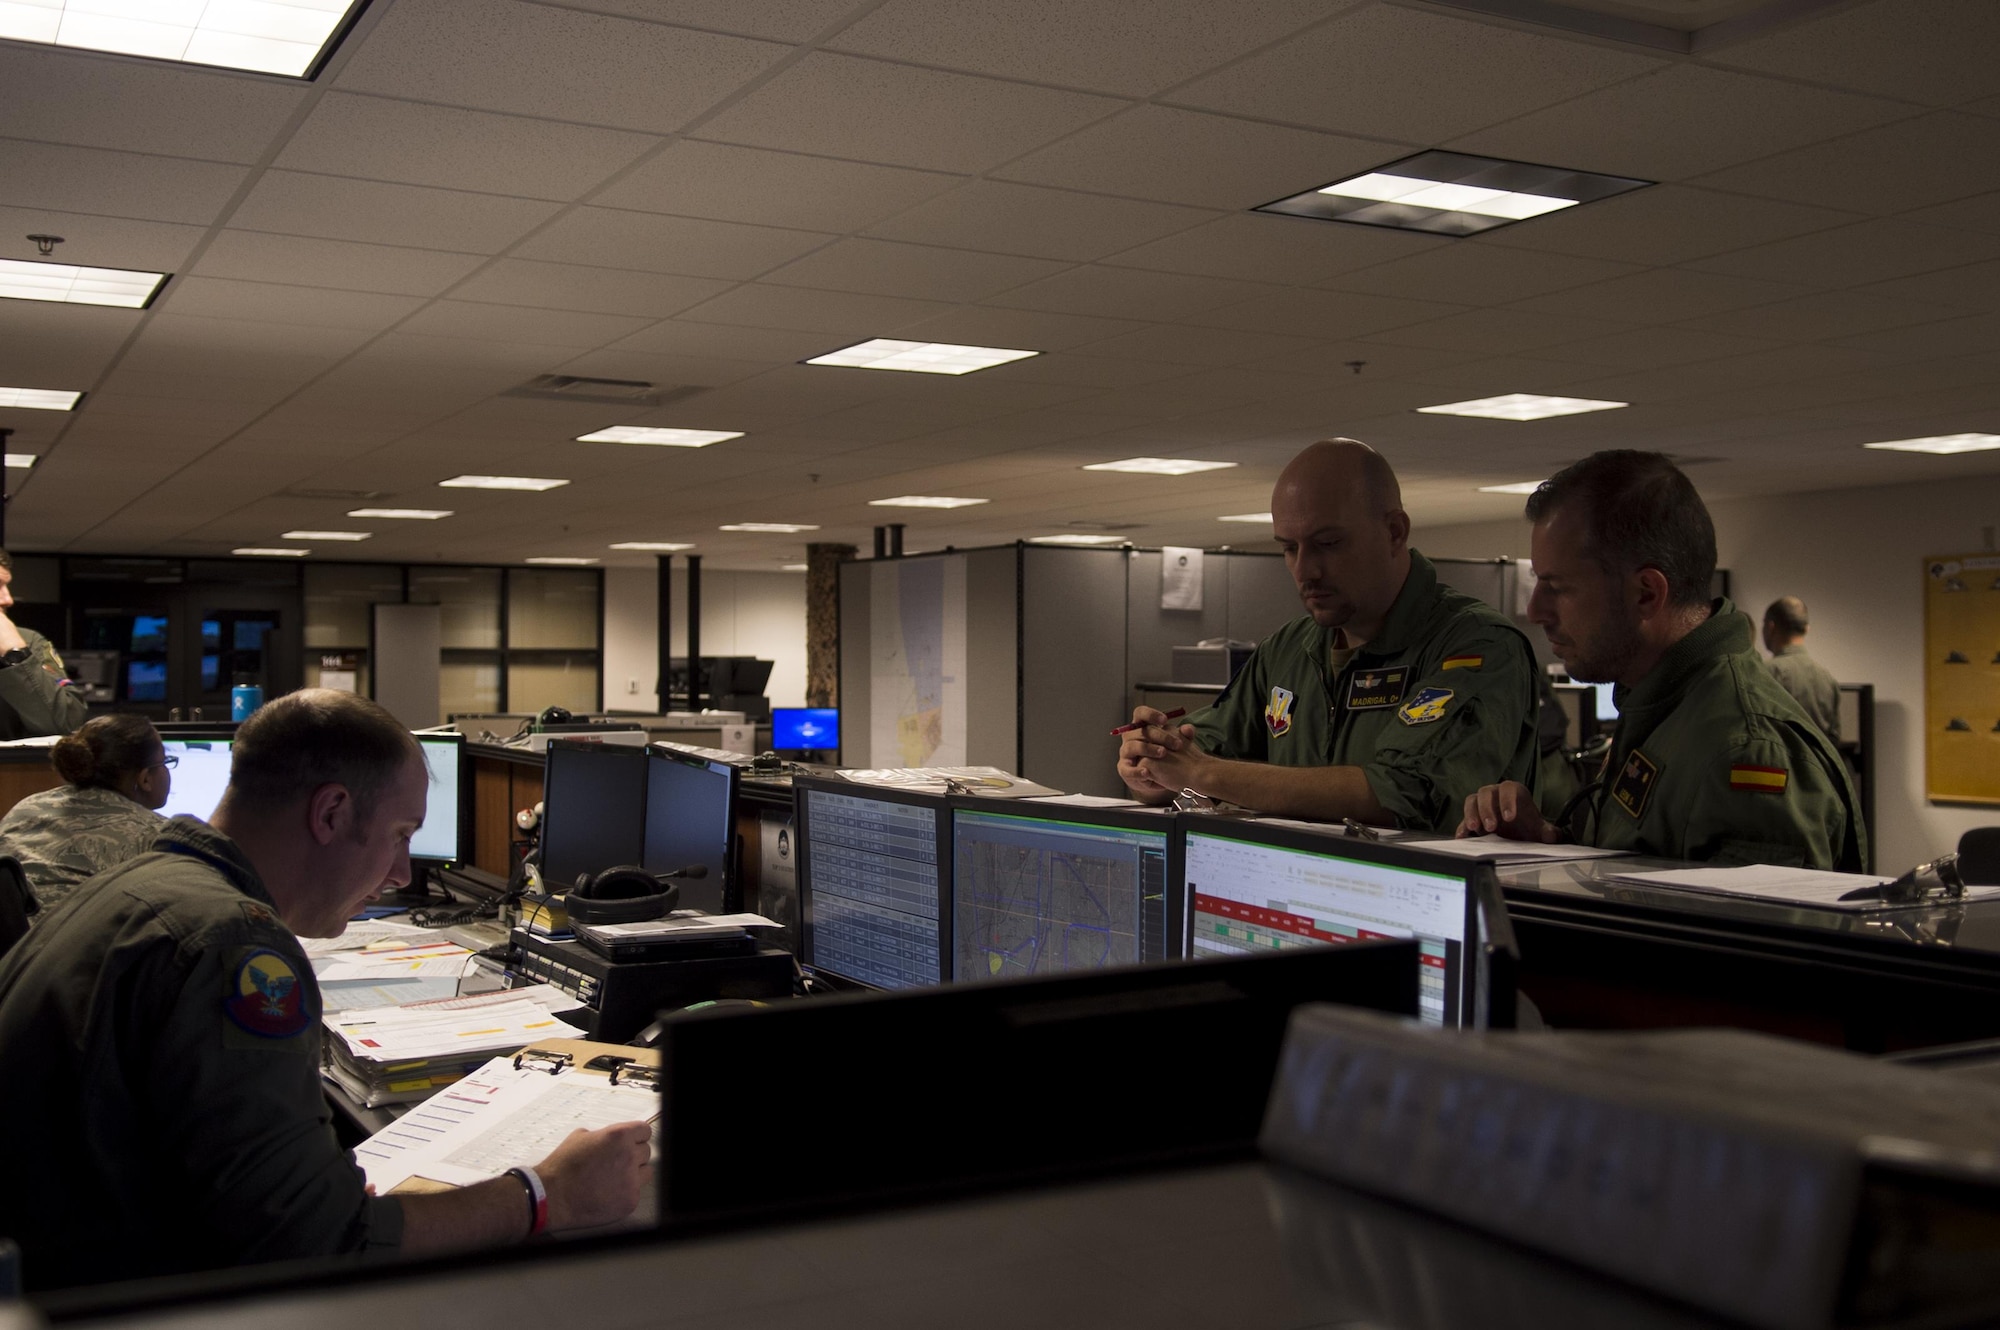 Maj. Jaime, a Spanish air force student pilot, right, and Staff Sgt. Francisco, a Spanish air force student sensor operator, middle, listen to a briefing given by a 29th Attack Squadron MQ-9 Reaper instructor pilot at Holloman Air Force Base, N.M. on April 5, 2017. Spain is currently participating in essential training here at the MQ-9 formal training unit. (U.S. Air Force photo by Tech. Sgt. Amanda Junk)